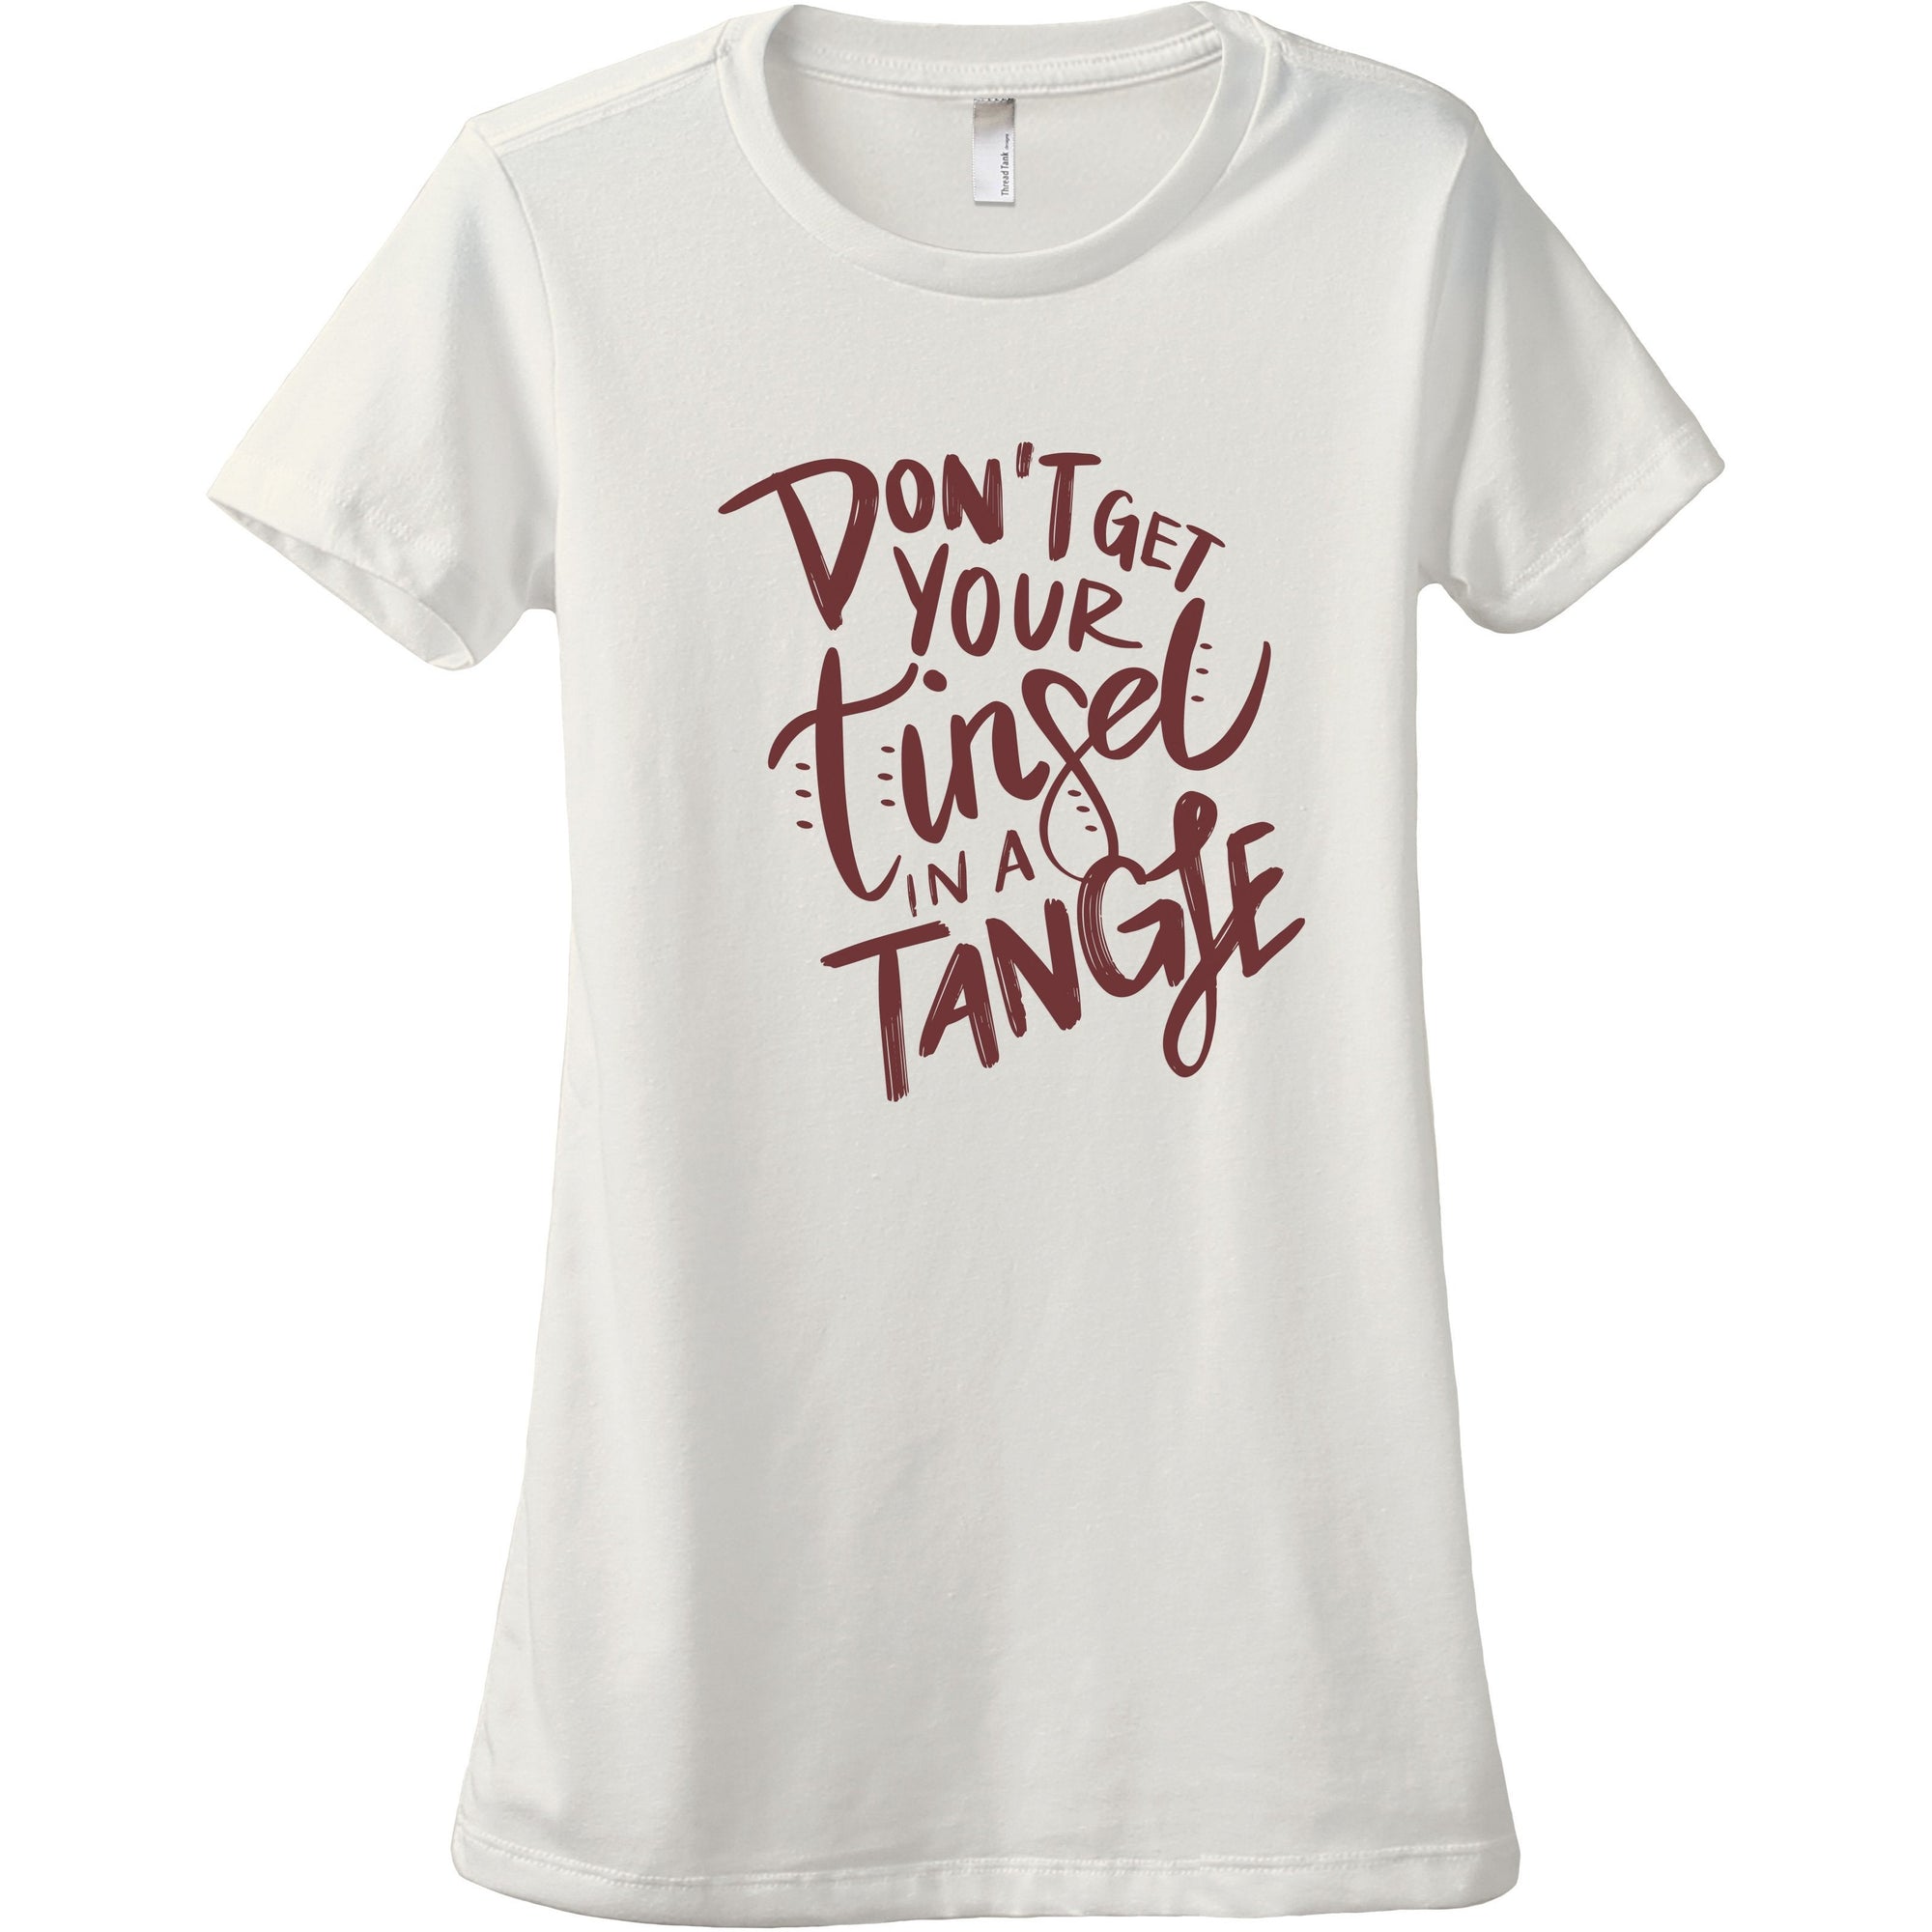 Don't Get Your Tinsel In A Tangle Women's Relaxed Crewneck T-Shirt Top Tee Vintage White Scarlet Scarlet Print